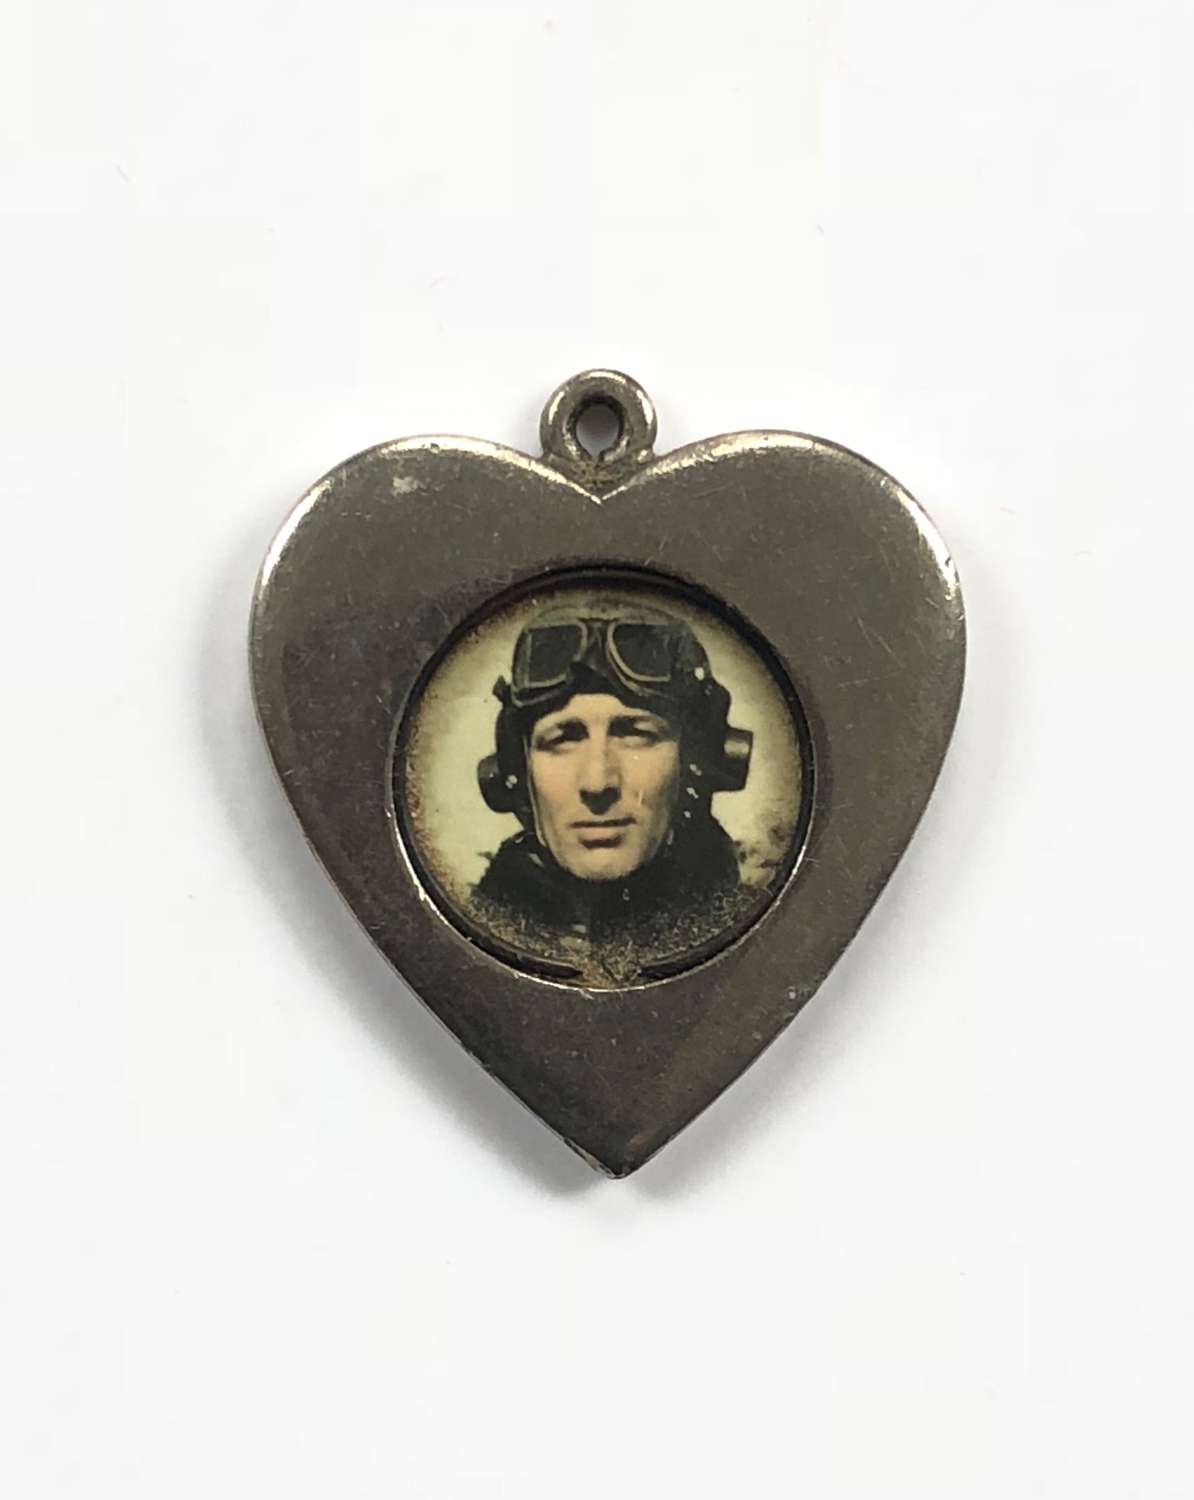 WW2 RAF Aircrew Sweetheart Pendent.